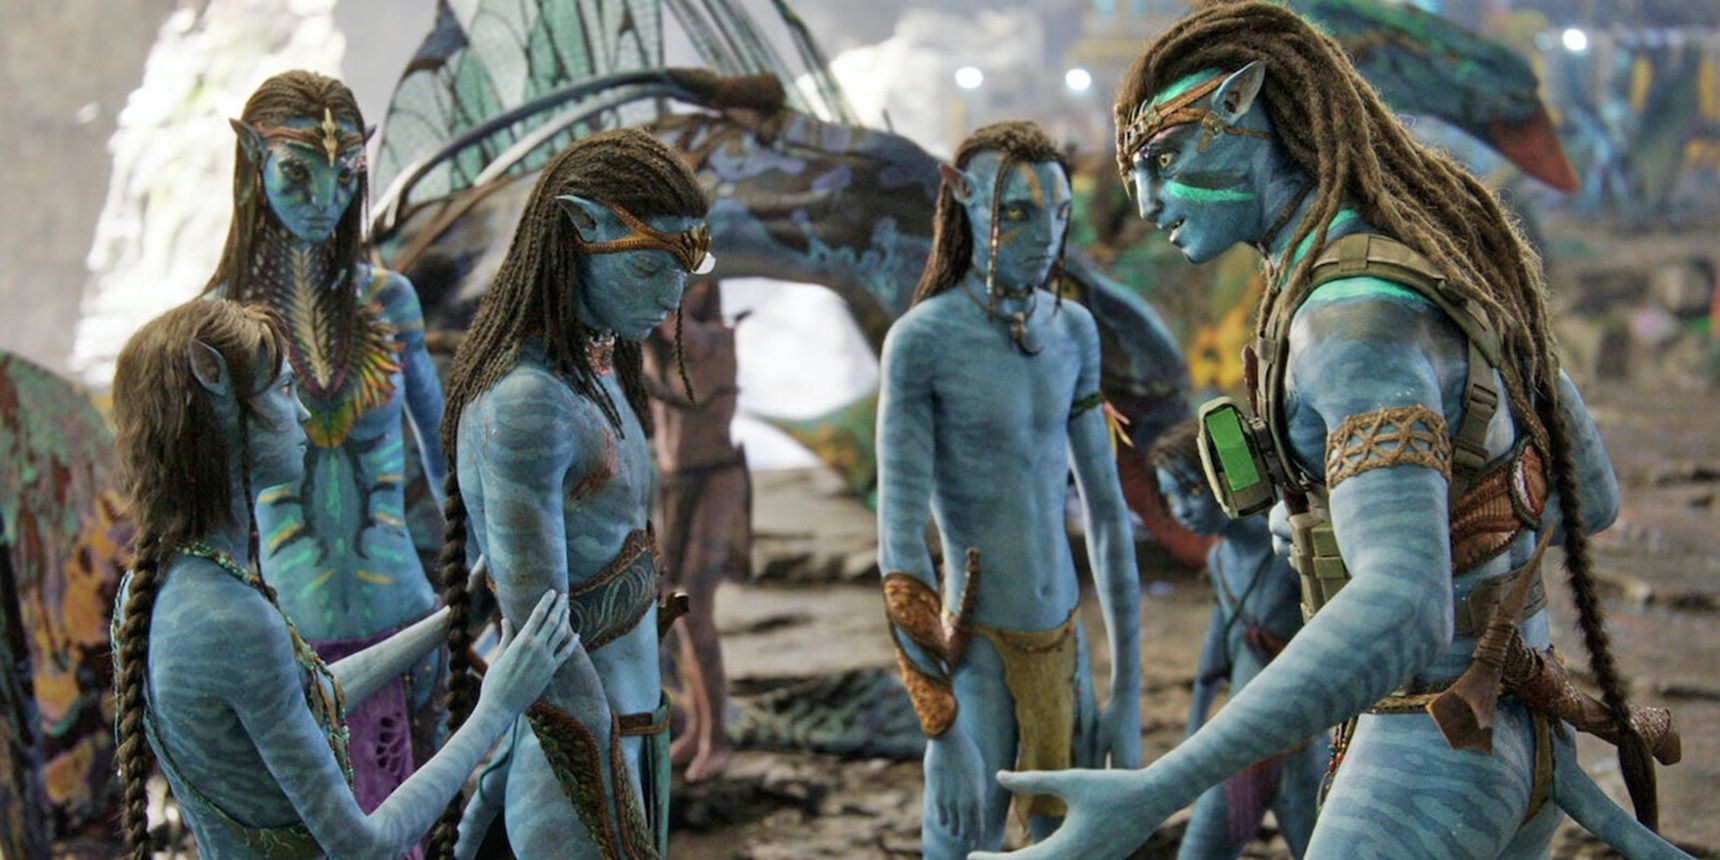 Jake talking to his family in Avatar The Way of Water